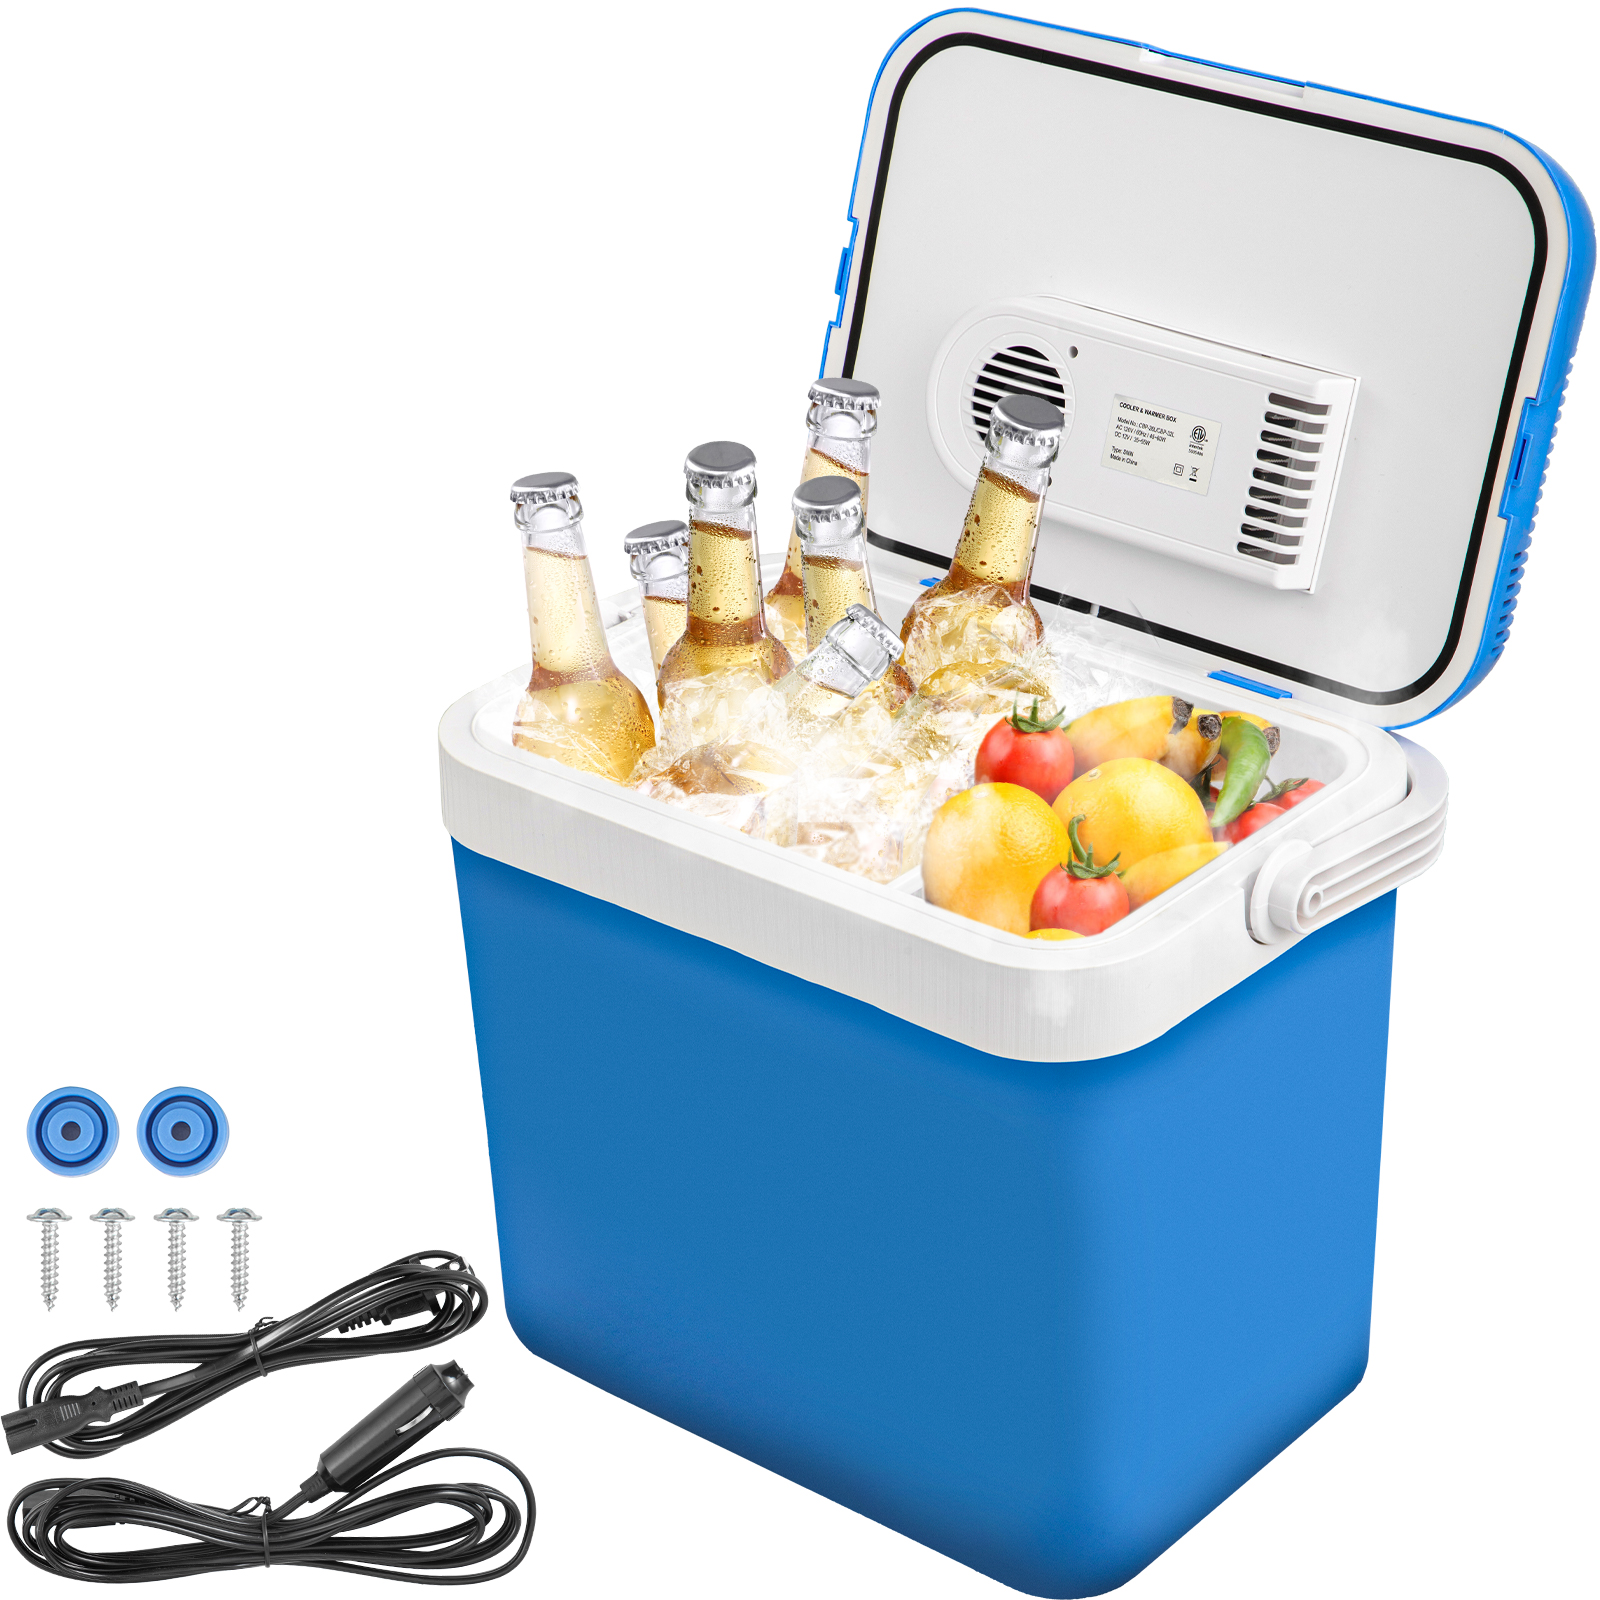 https://d2qc09rl1gfuof.cloudfront.net/product/SLBDTS32L110VYP8A/electric-cooler-warmer-m100-1.2.jpg